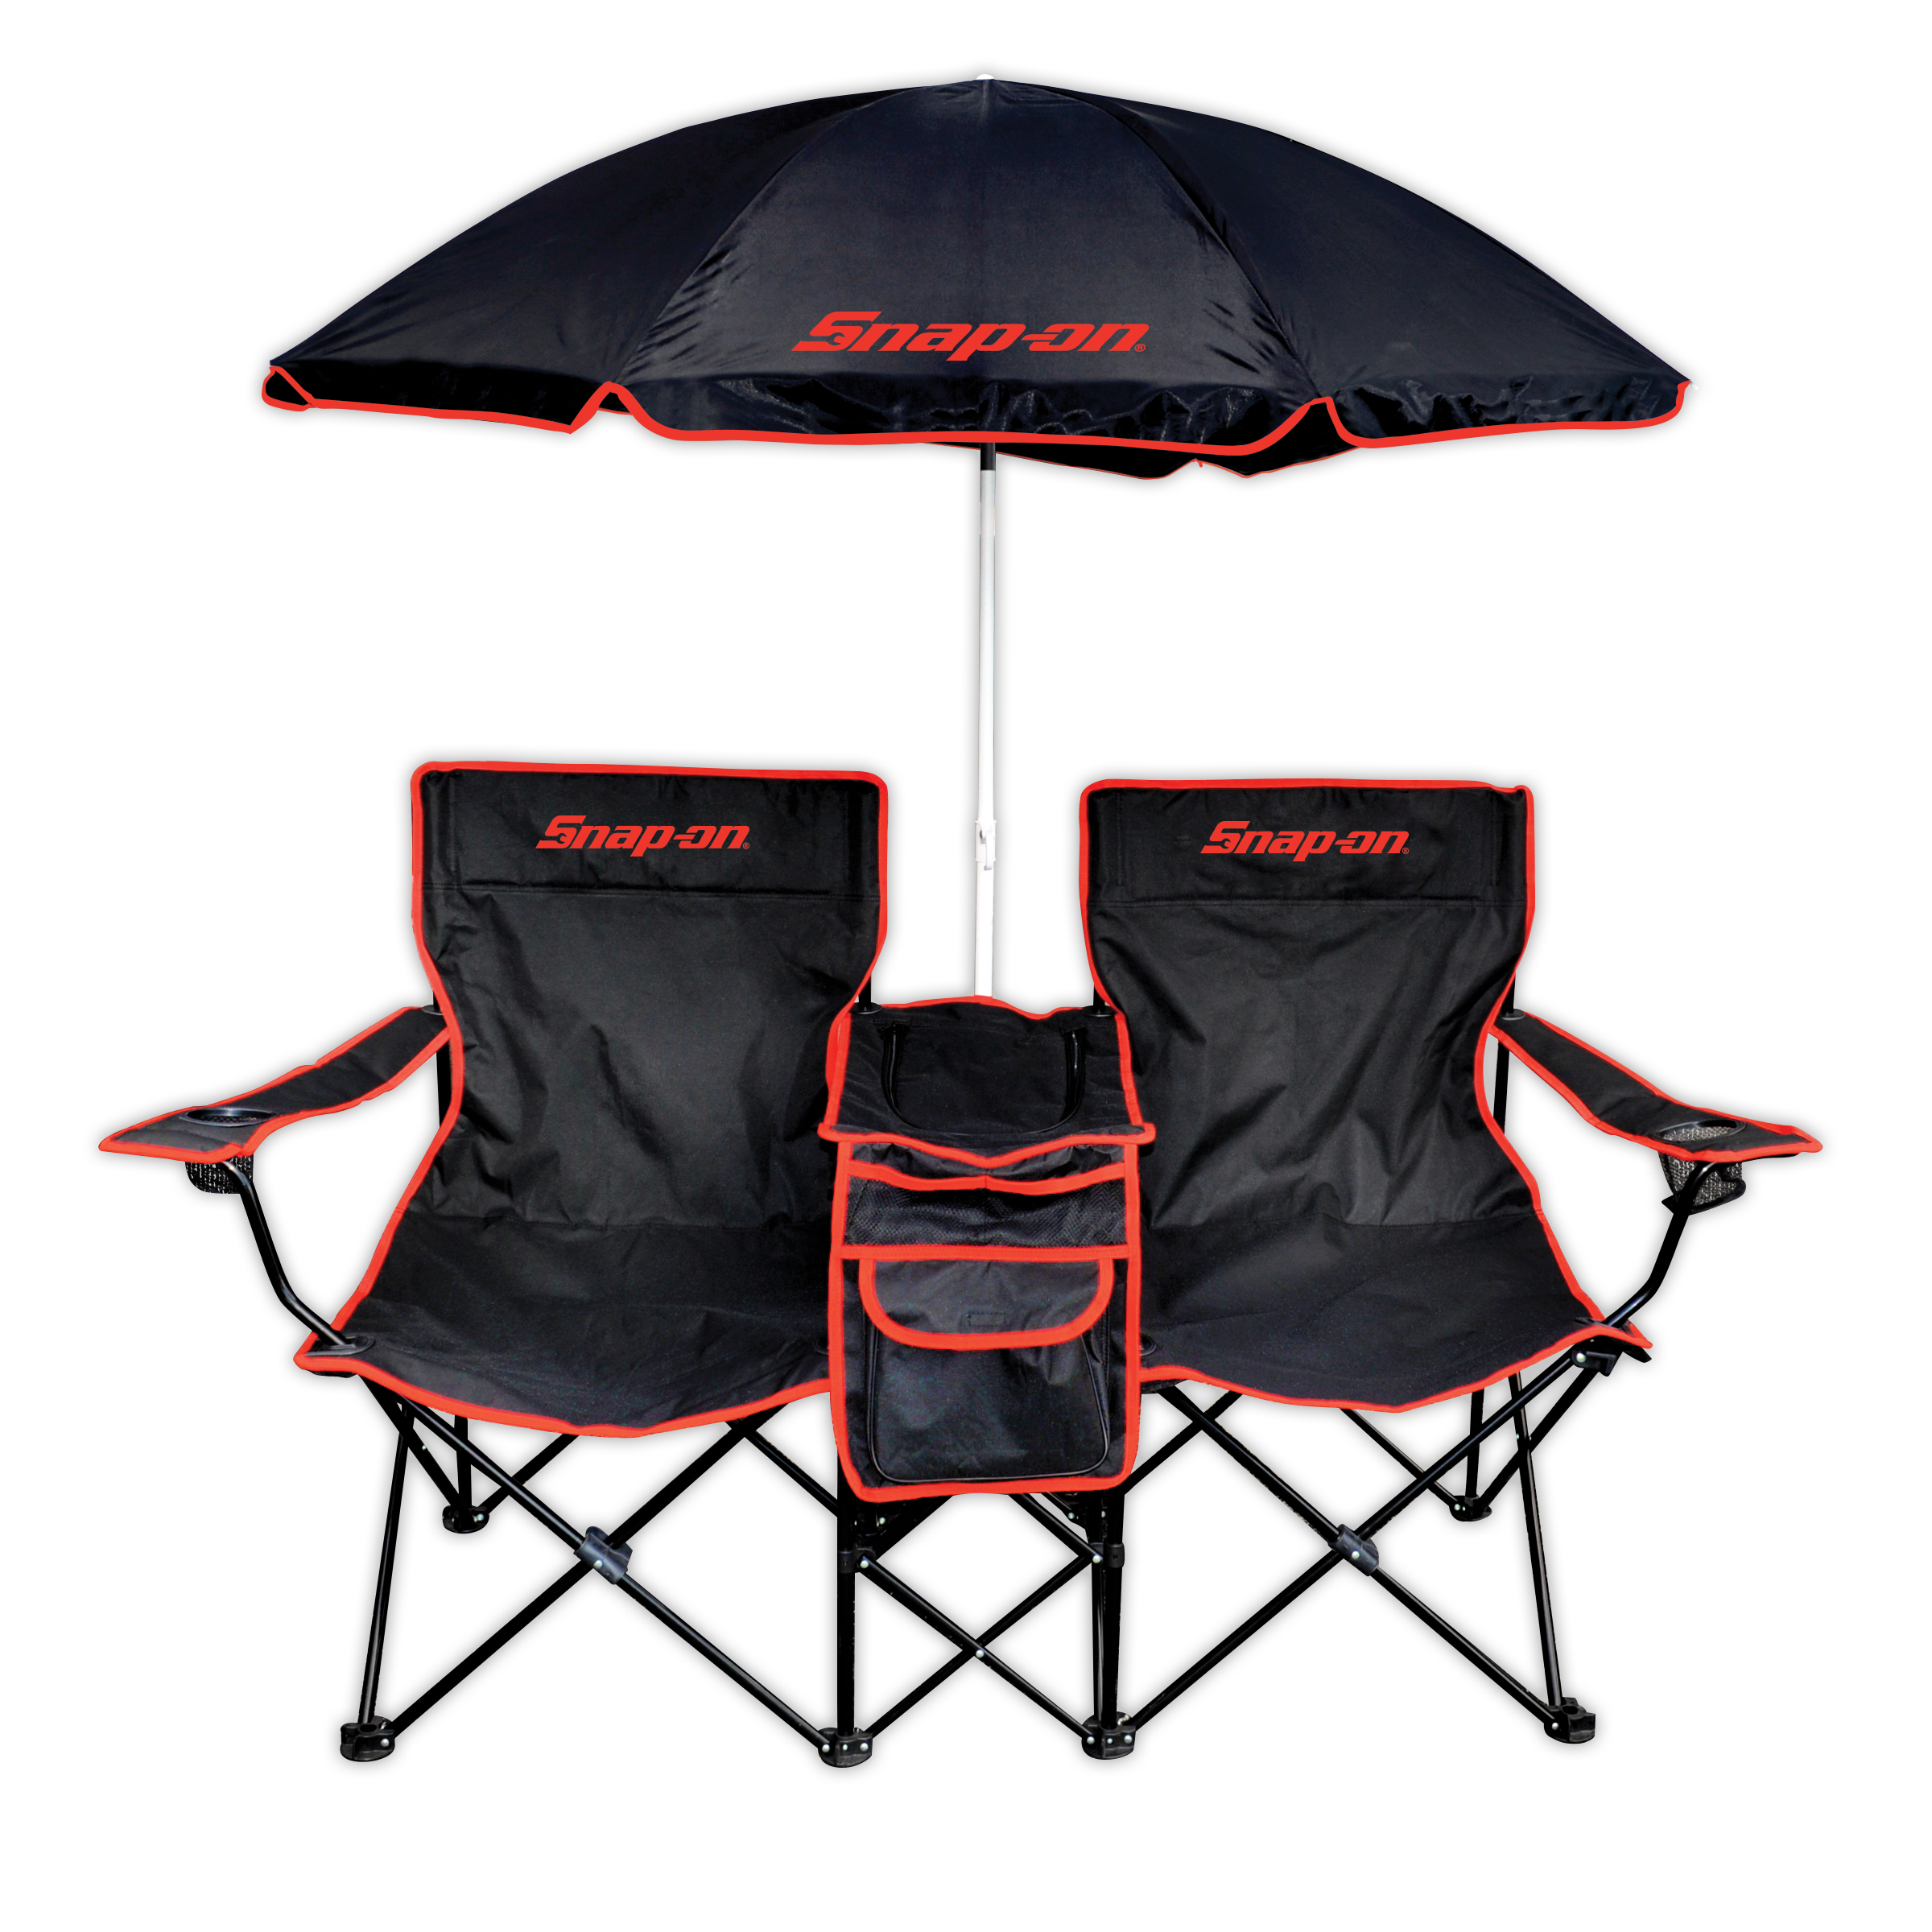 blackred double chair with umbrella and bluetooth speakers